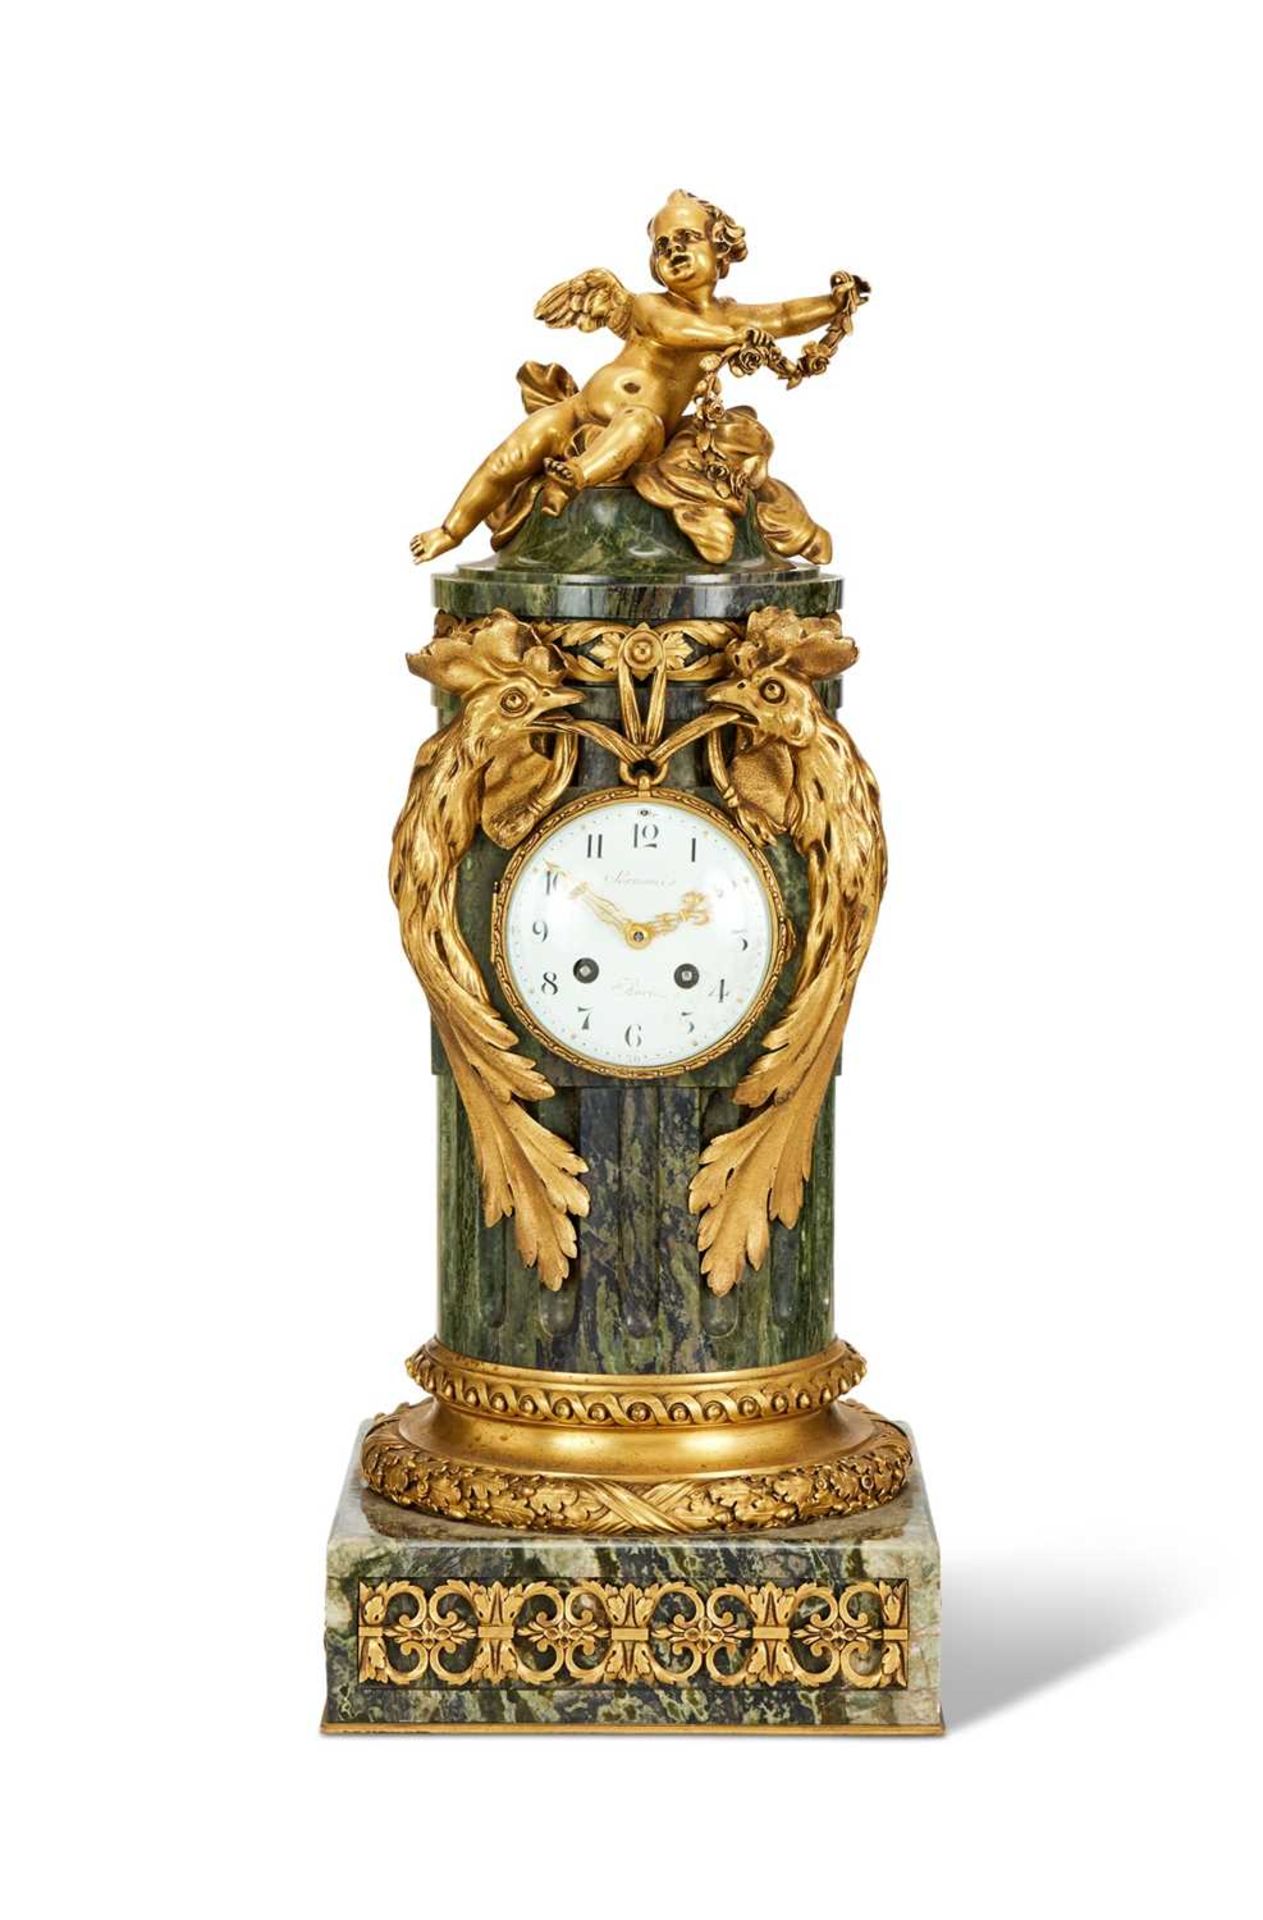 SORMANI, PARIS: AN IMPORTANT LATE 19TH CENTURY ORMOLU AND MARBLE MANTEL CLOCK - Image 5 of 5